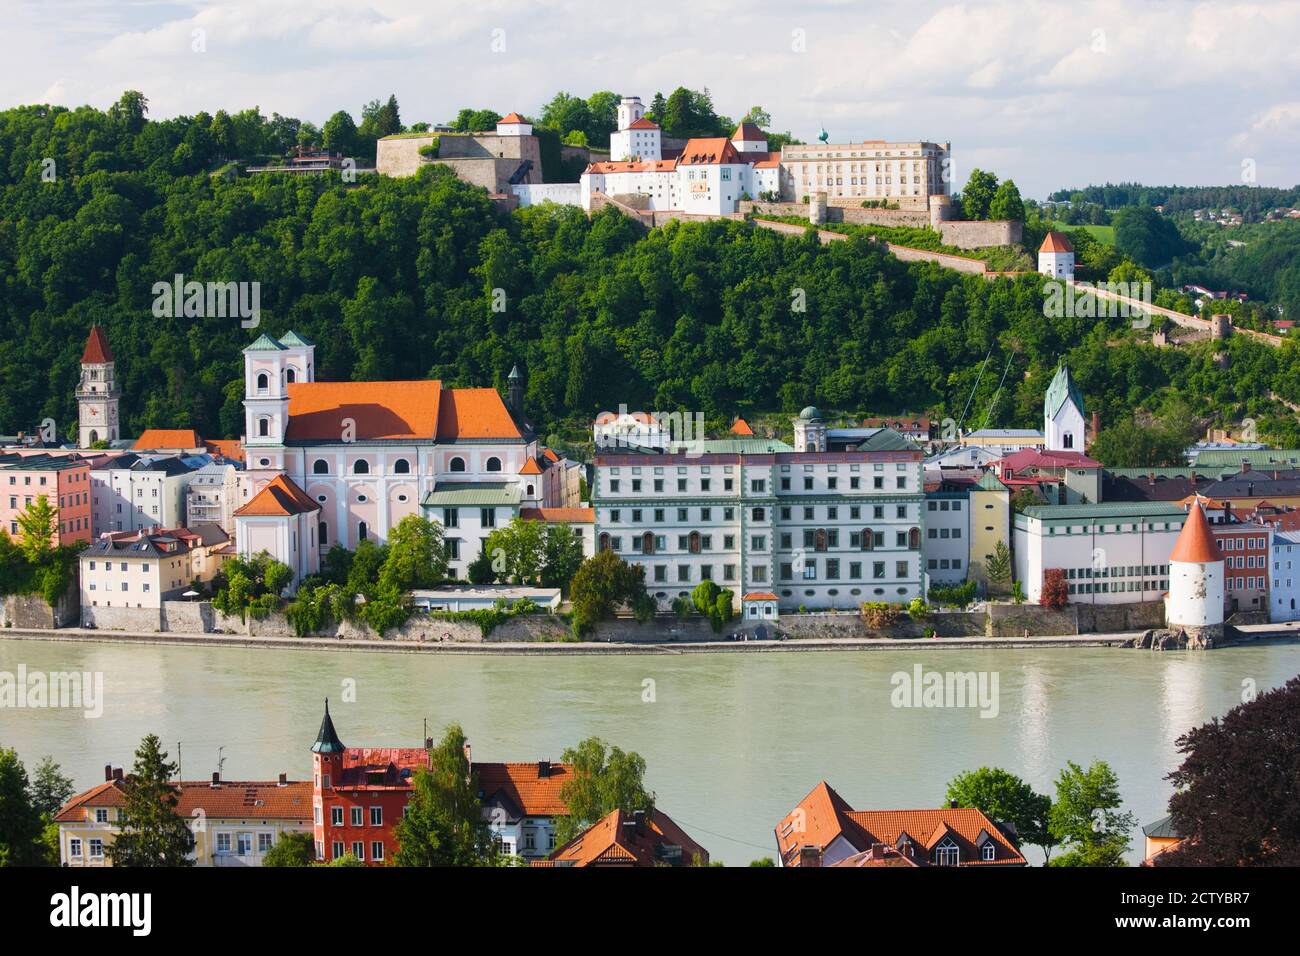 Town at the waterfront, Inn River, Passau, Bavaria, Germany Stock Photo